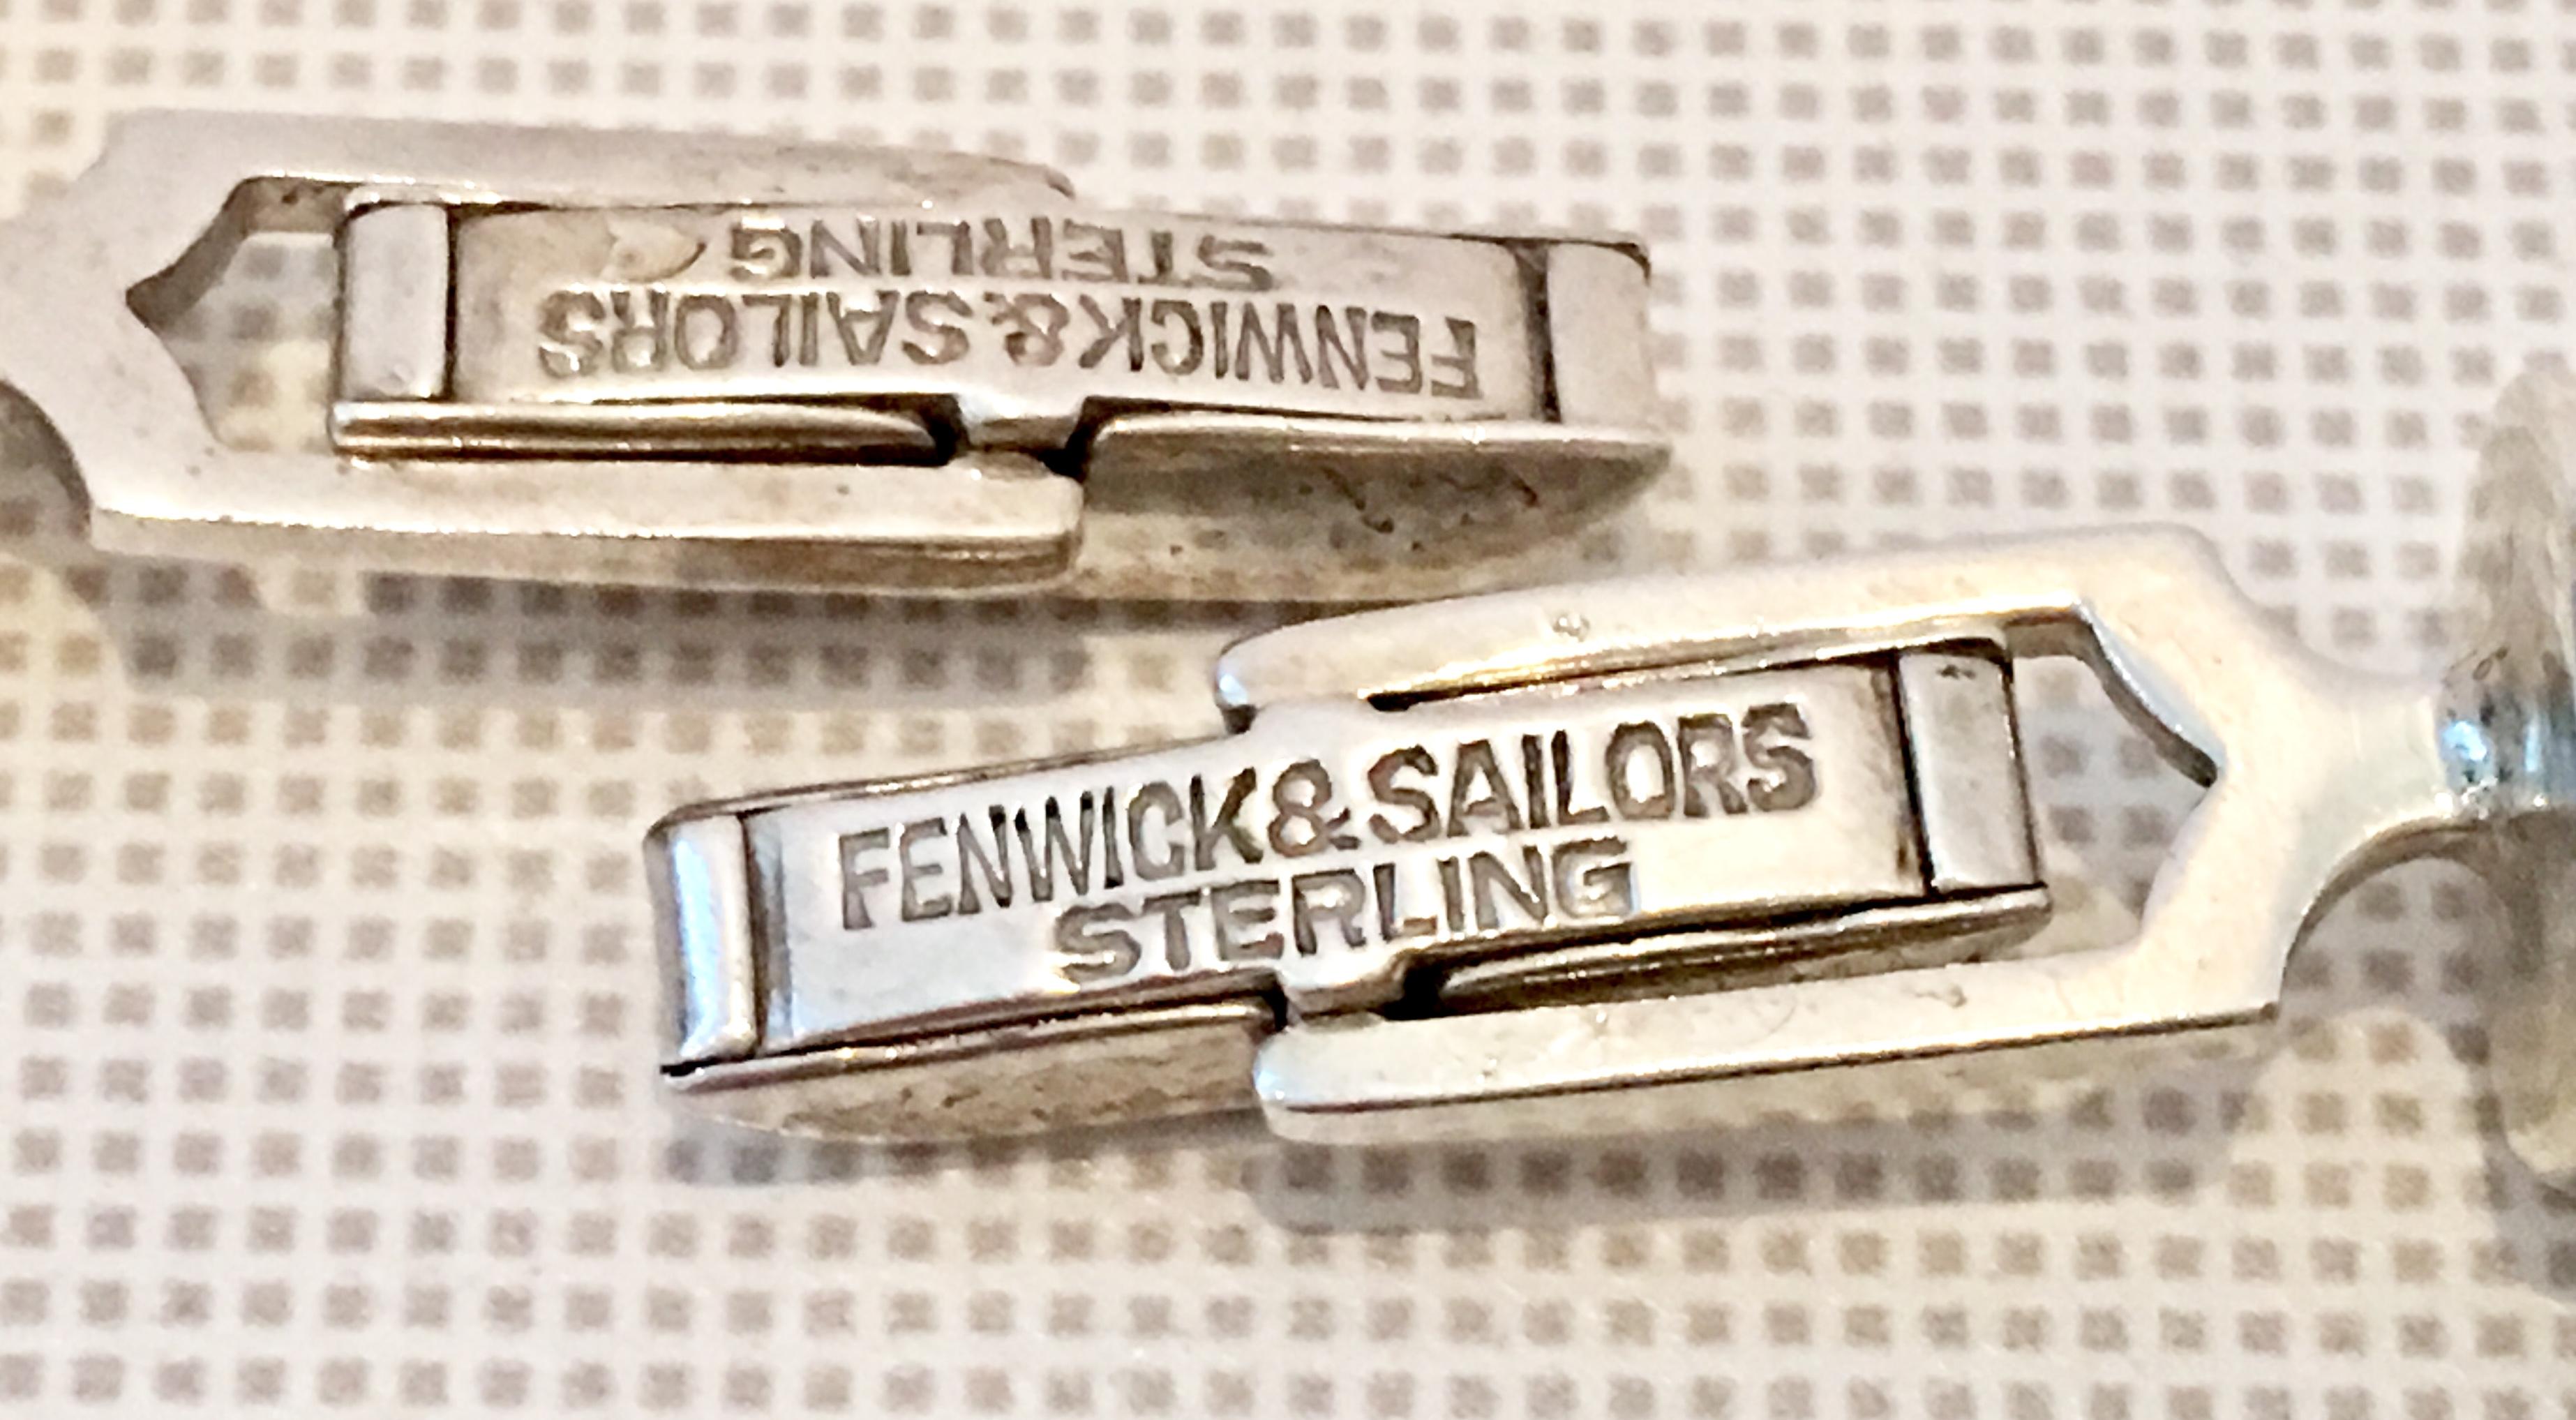 Mid-Century Sterling Silver Horse Cufflinks By Fenwick & Sailors For Sale 4